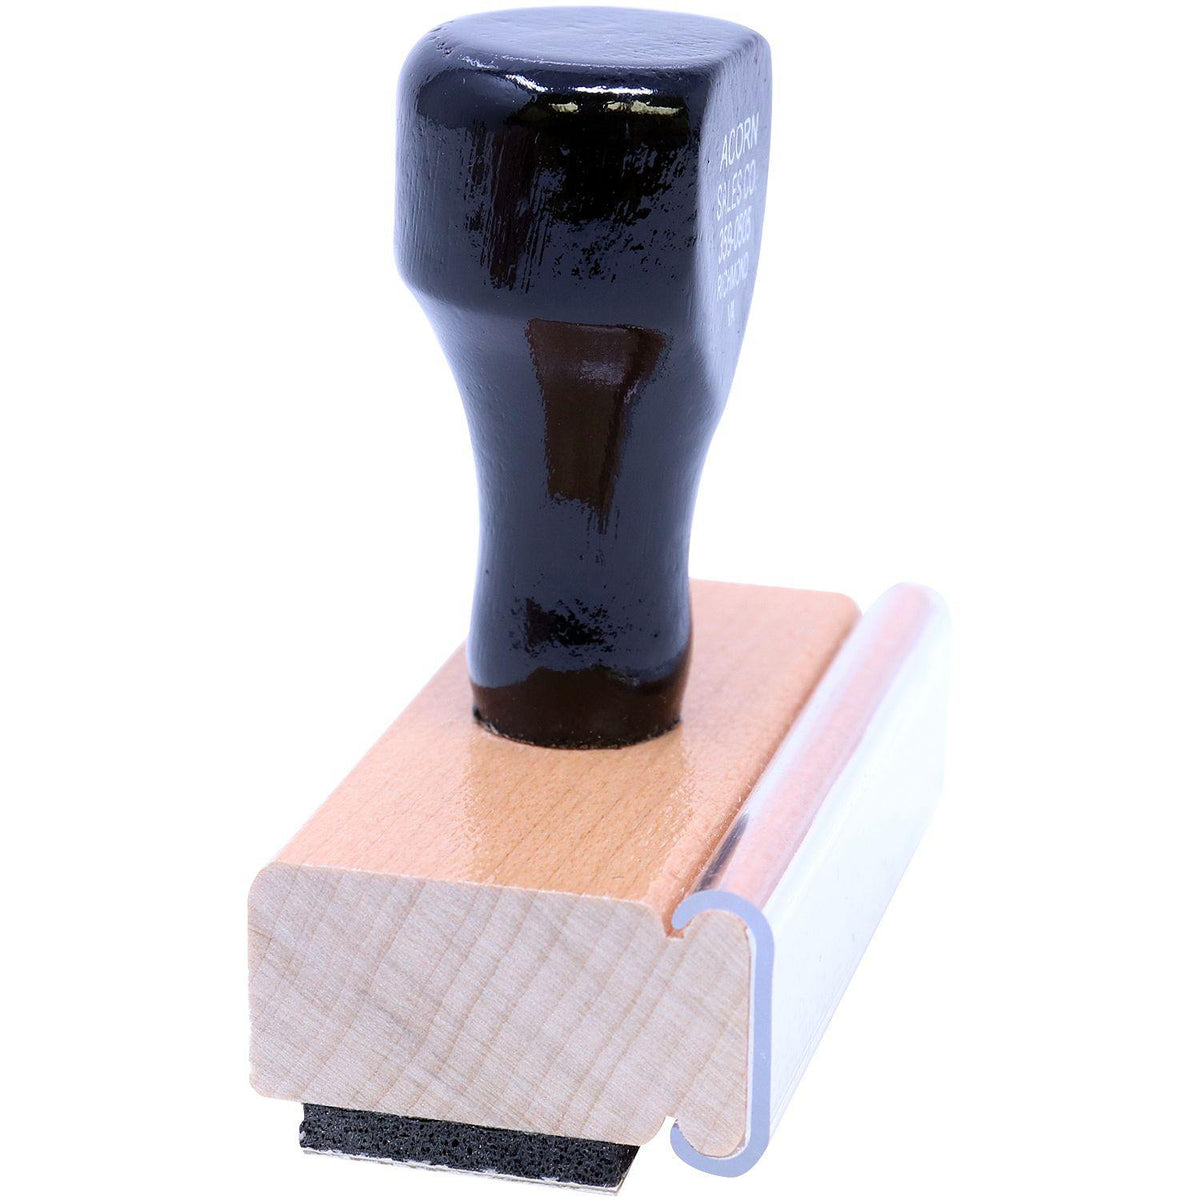 Side View of Large Patient&#39;s Signature on File Rubber Stamp at an Angle